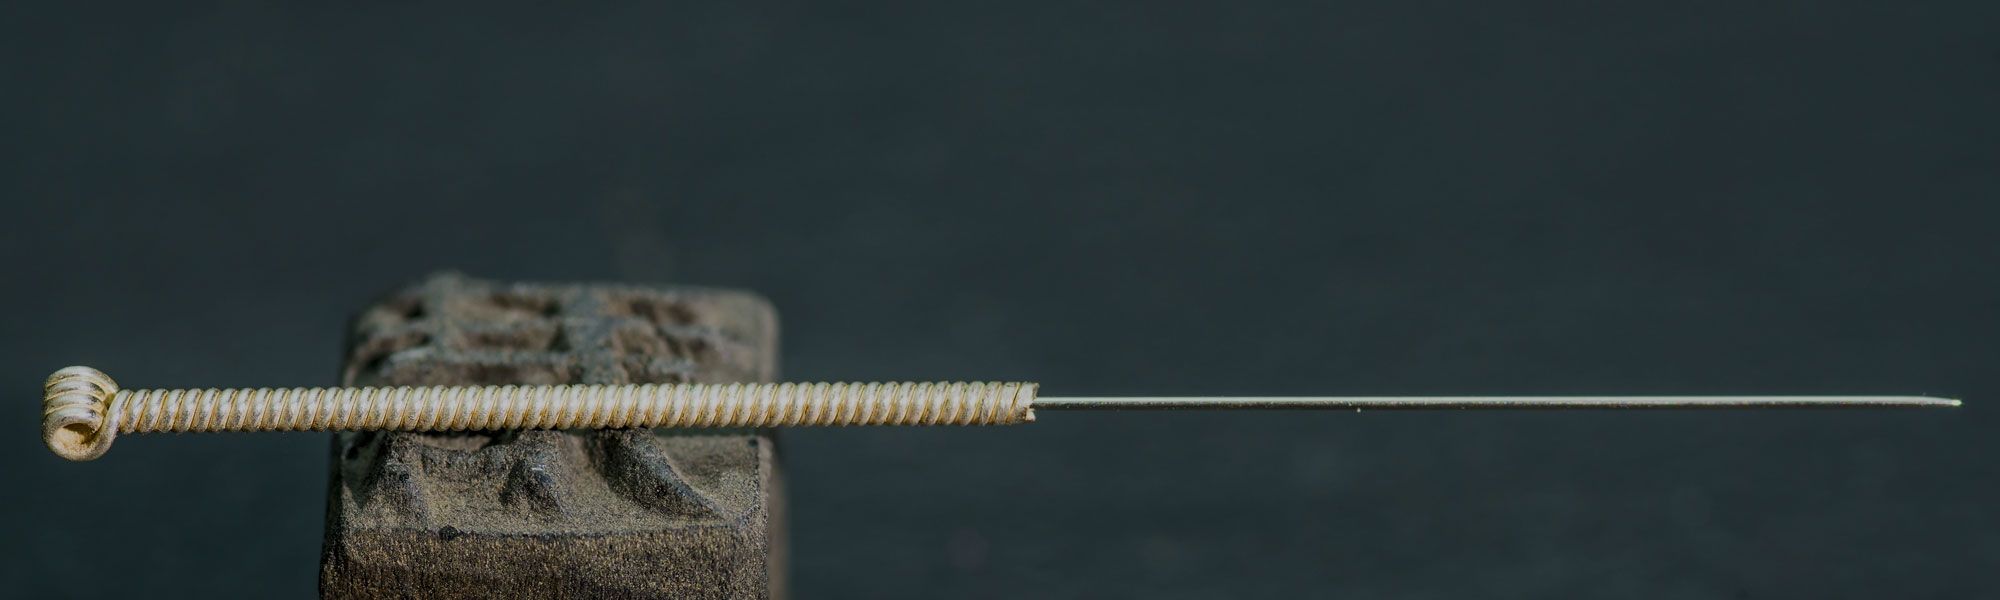 Acupuncture needle used in training course